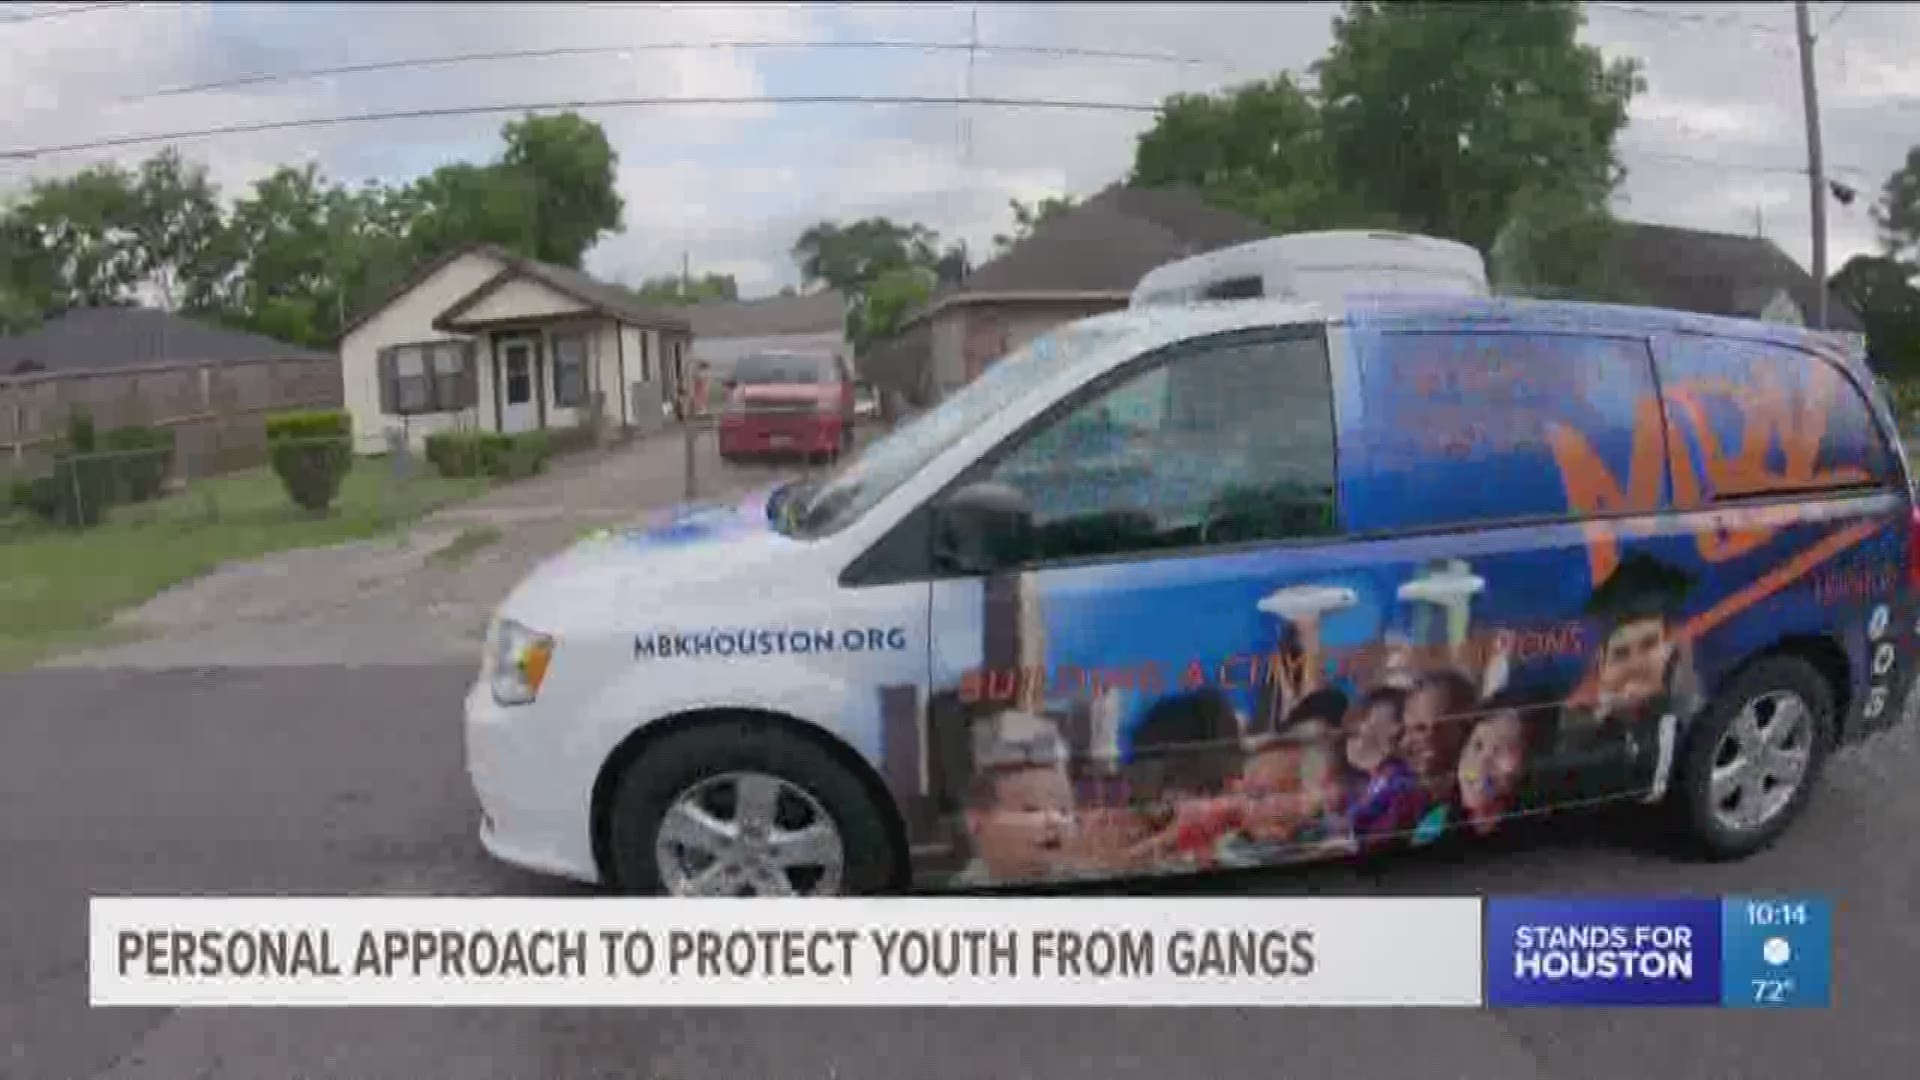 A program, run by the City of Houston Health Department, works to provide intervention instead of jail for juveniles